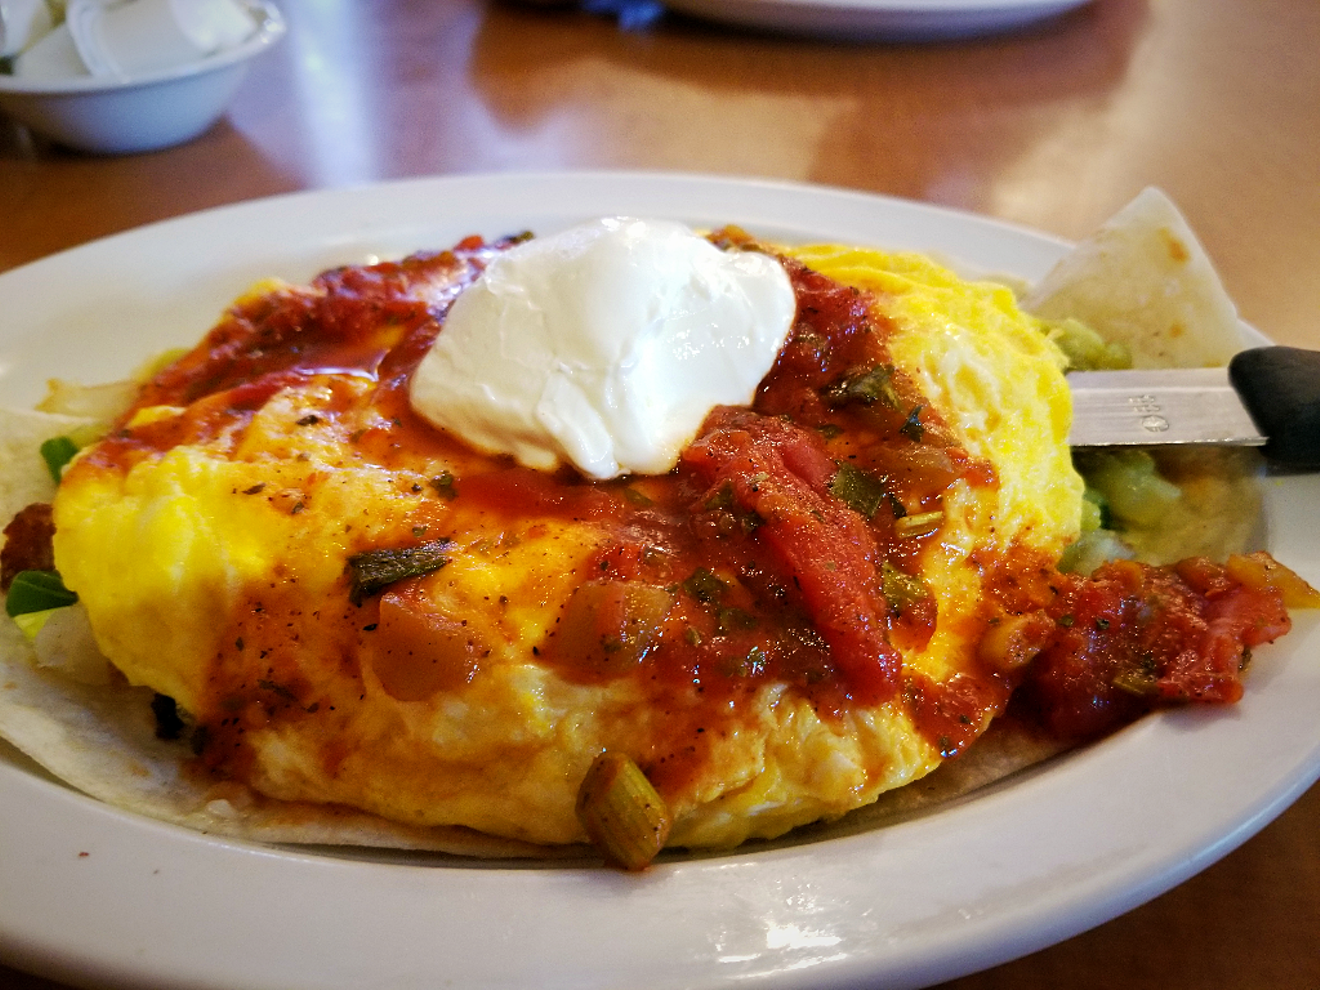 Breakfast plates are famously huge at this Tempe institution.